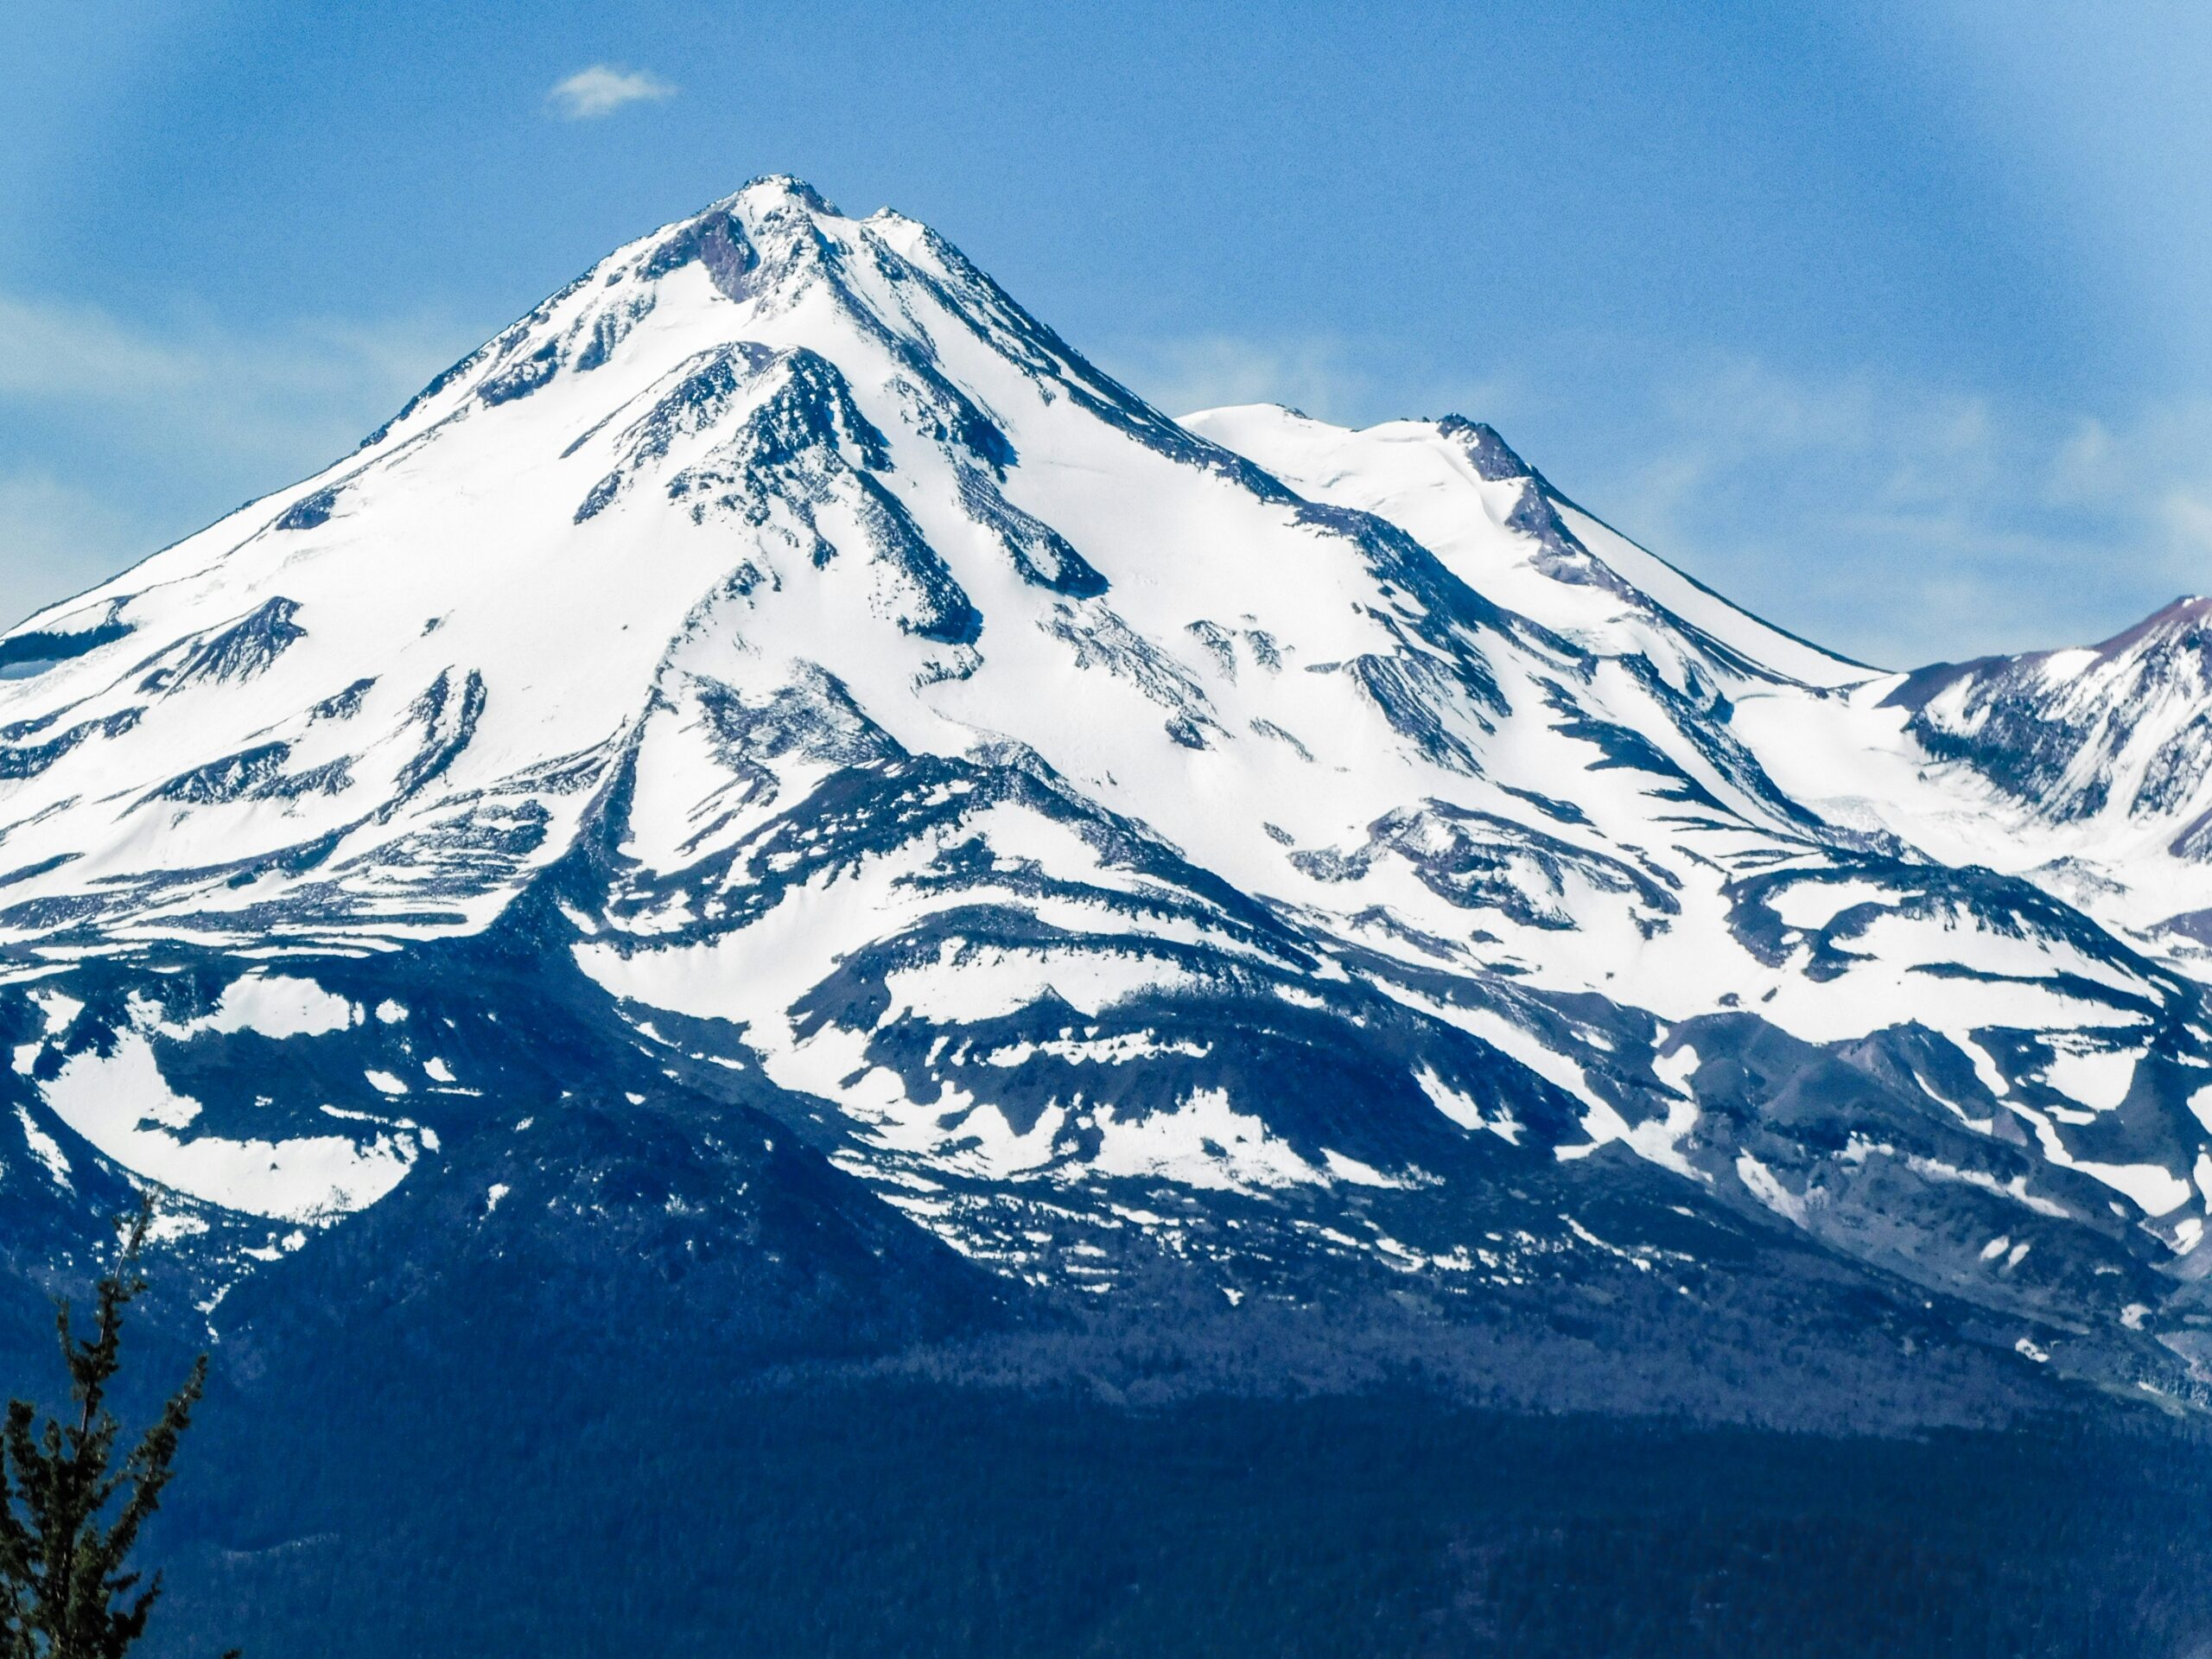 Has Anyone Died From Exhaustion While Descending Mount Shasta?